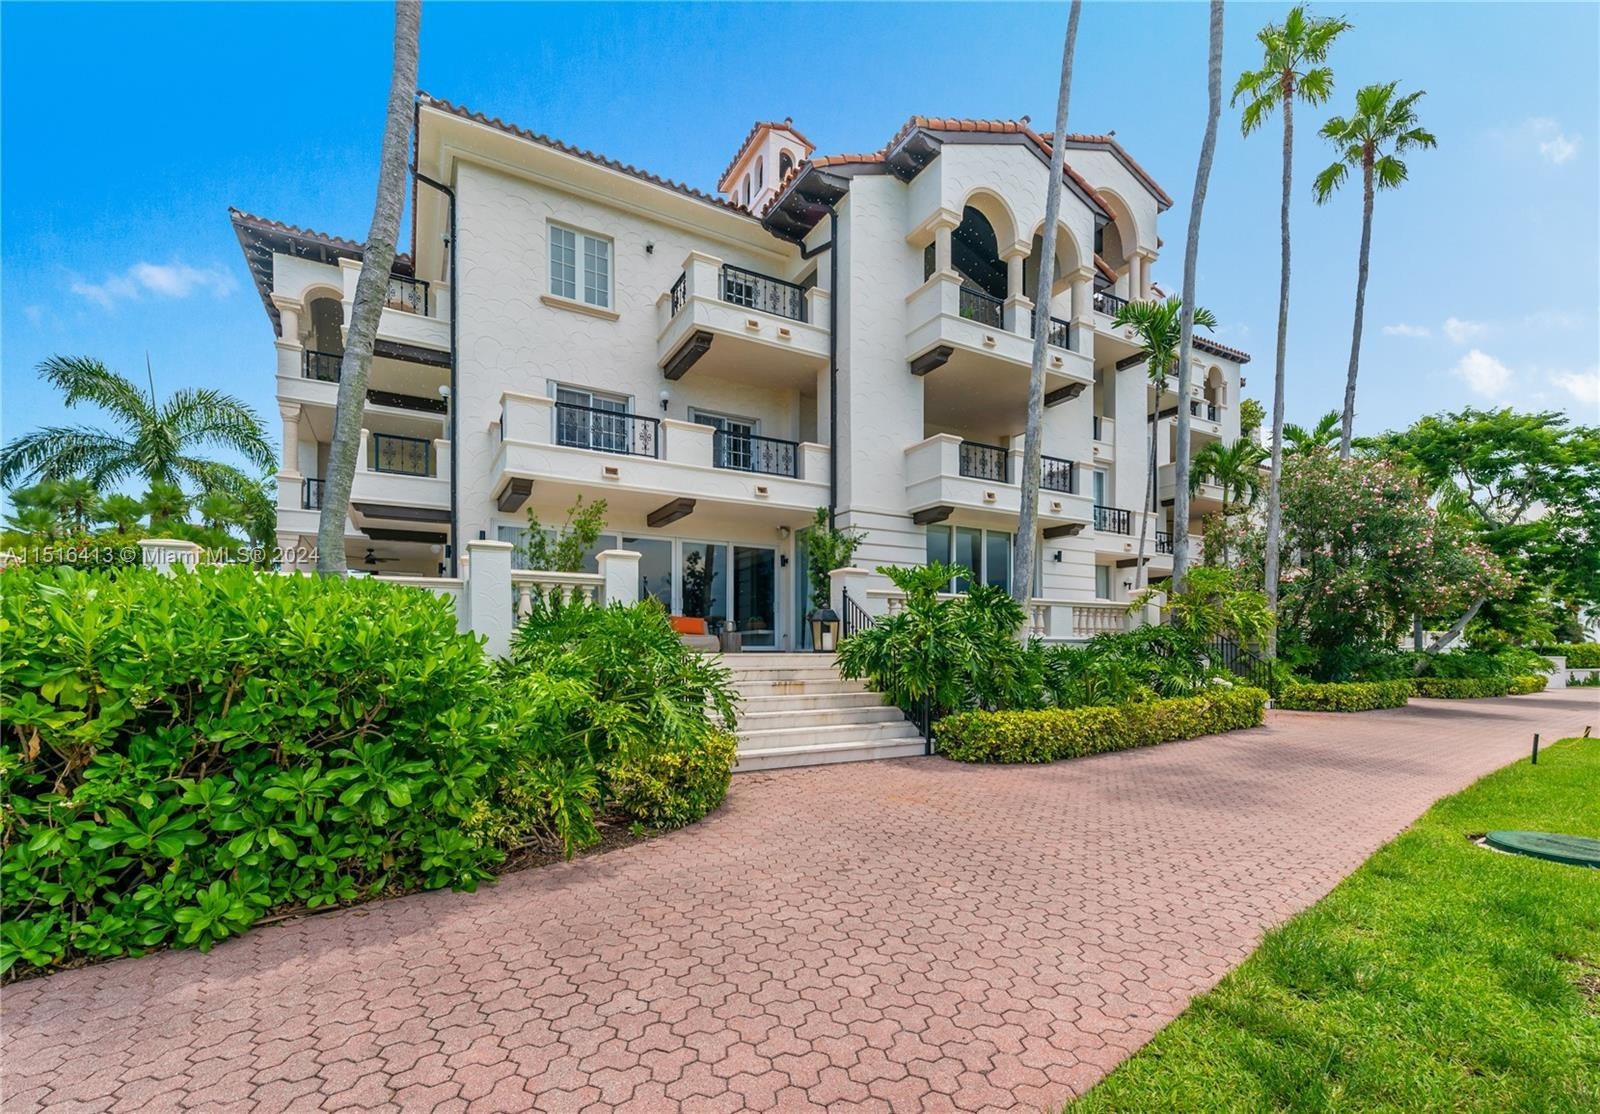 39. 2514 Fisher Island Dr